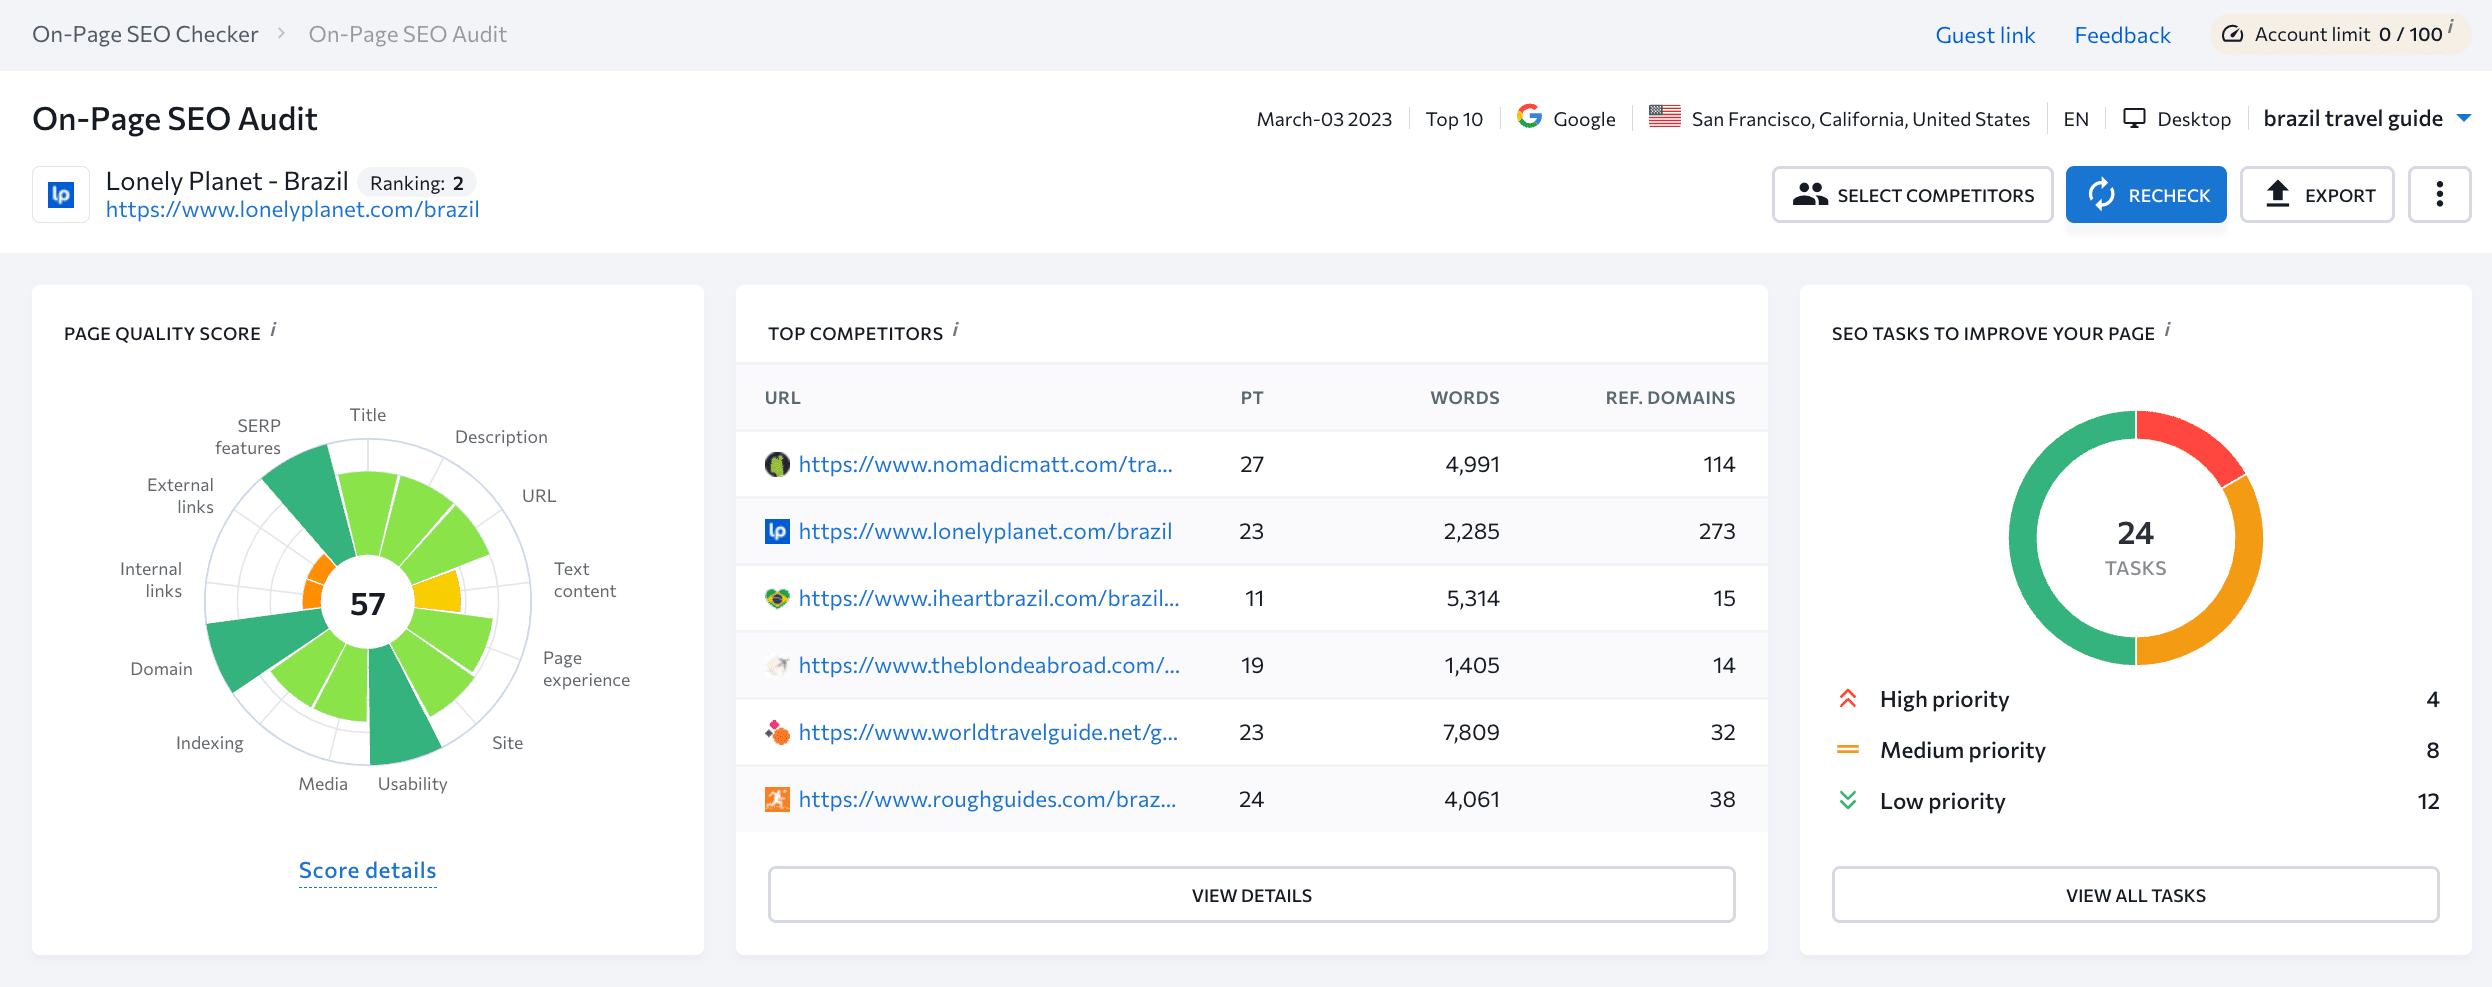 SE Ranking's On-Page SEO Checker dashboard